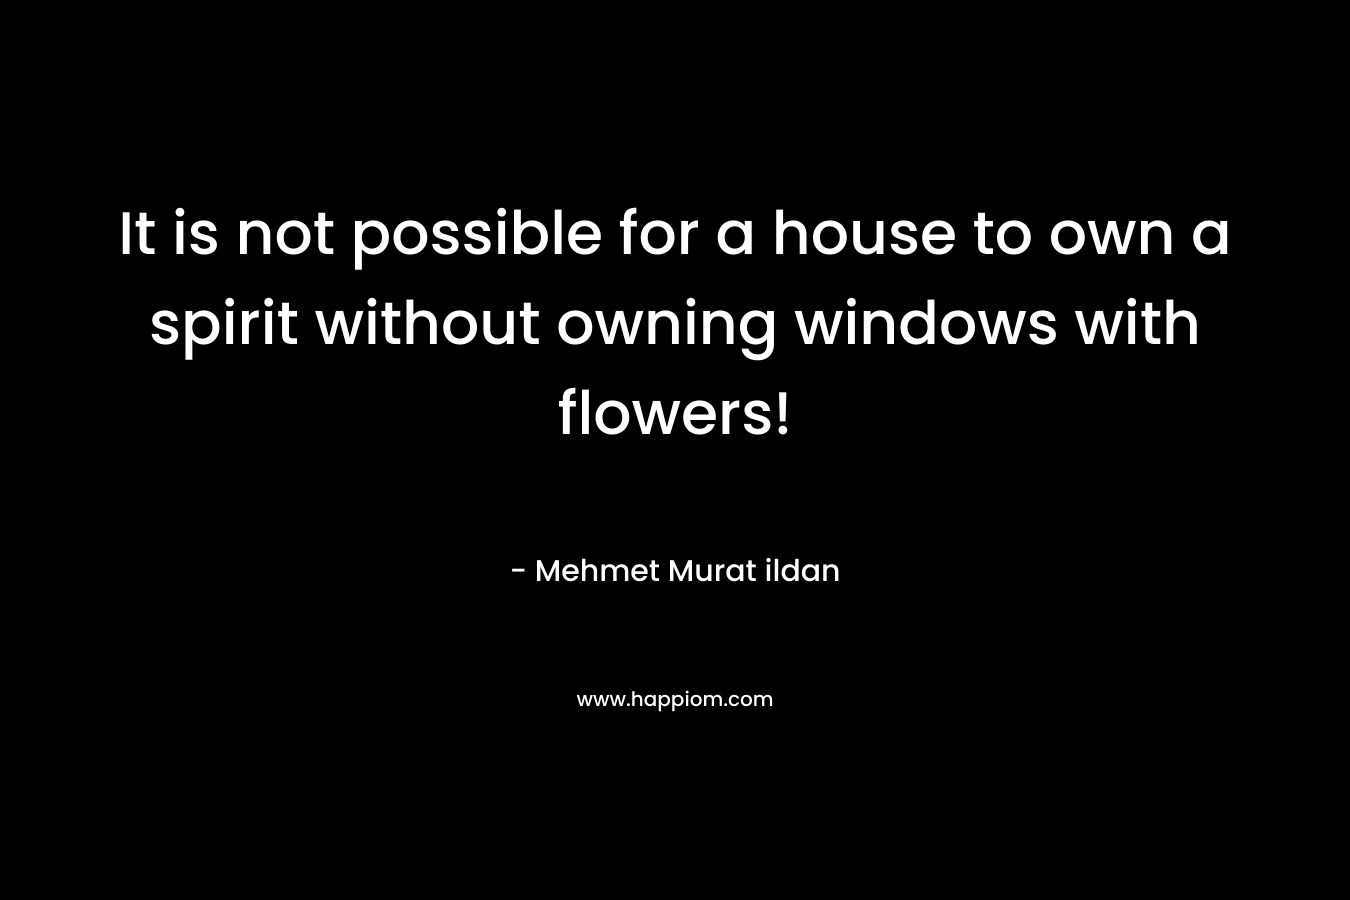 It is not possible for a house to own a spirit without owning windows with flowers!